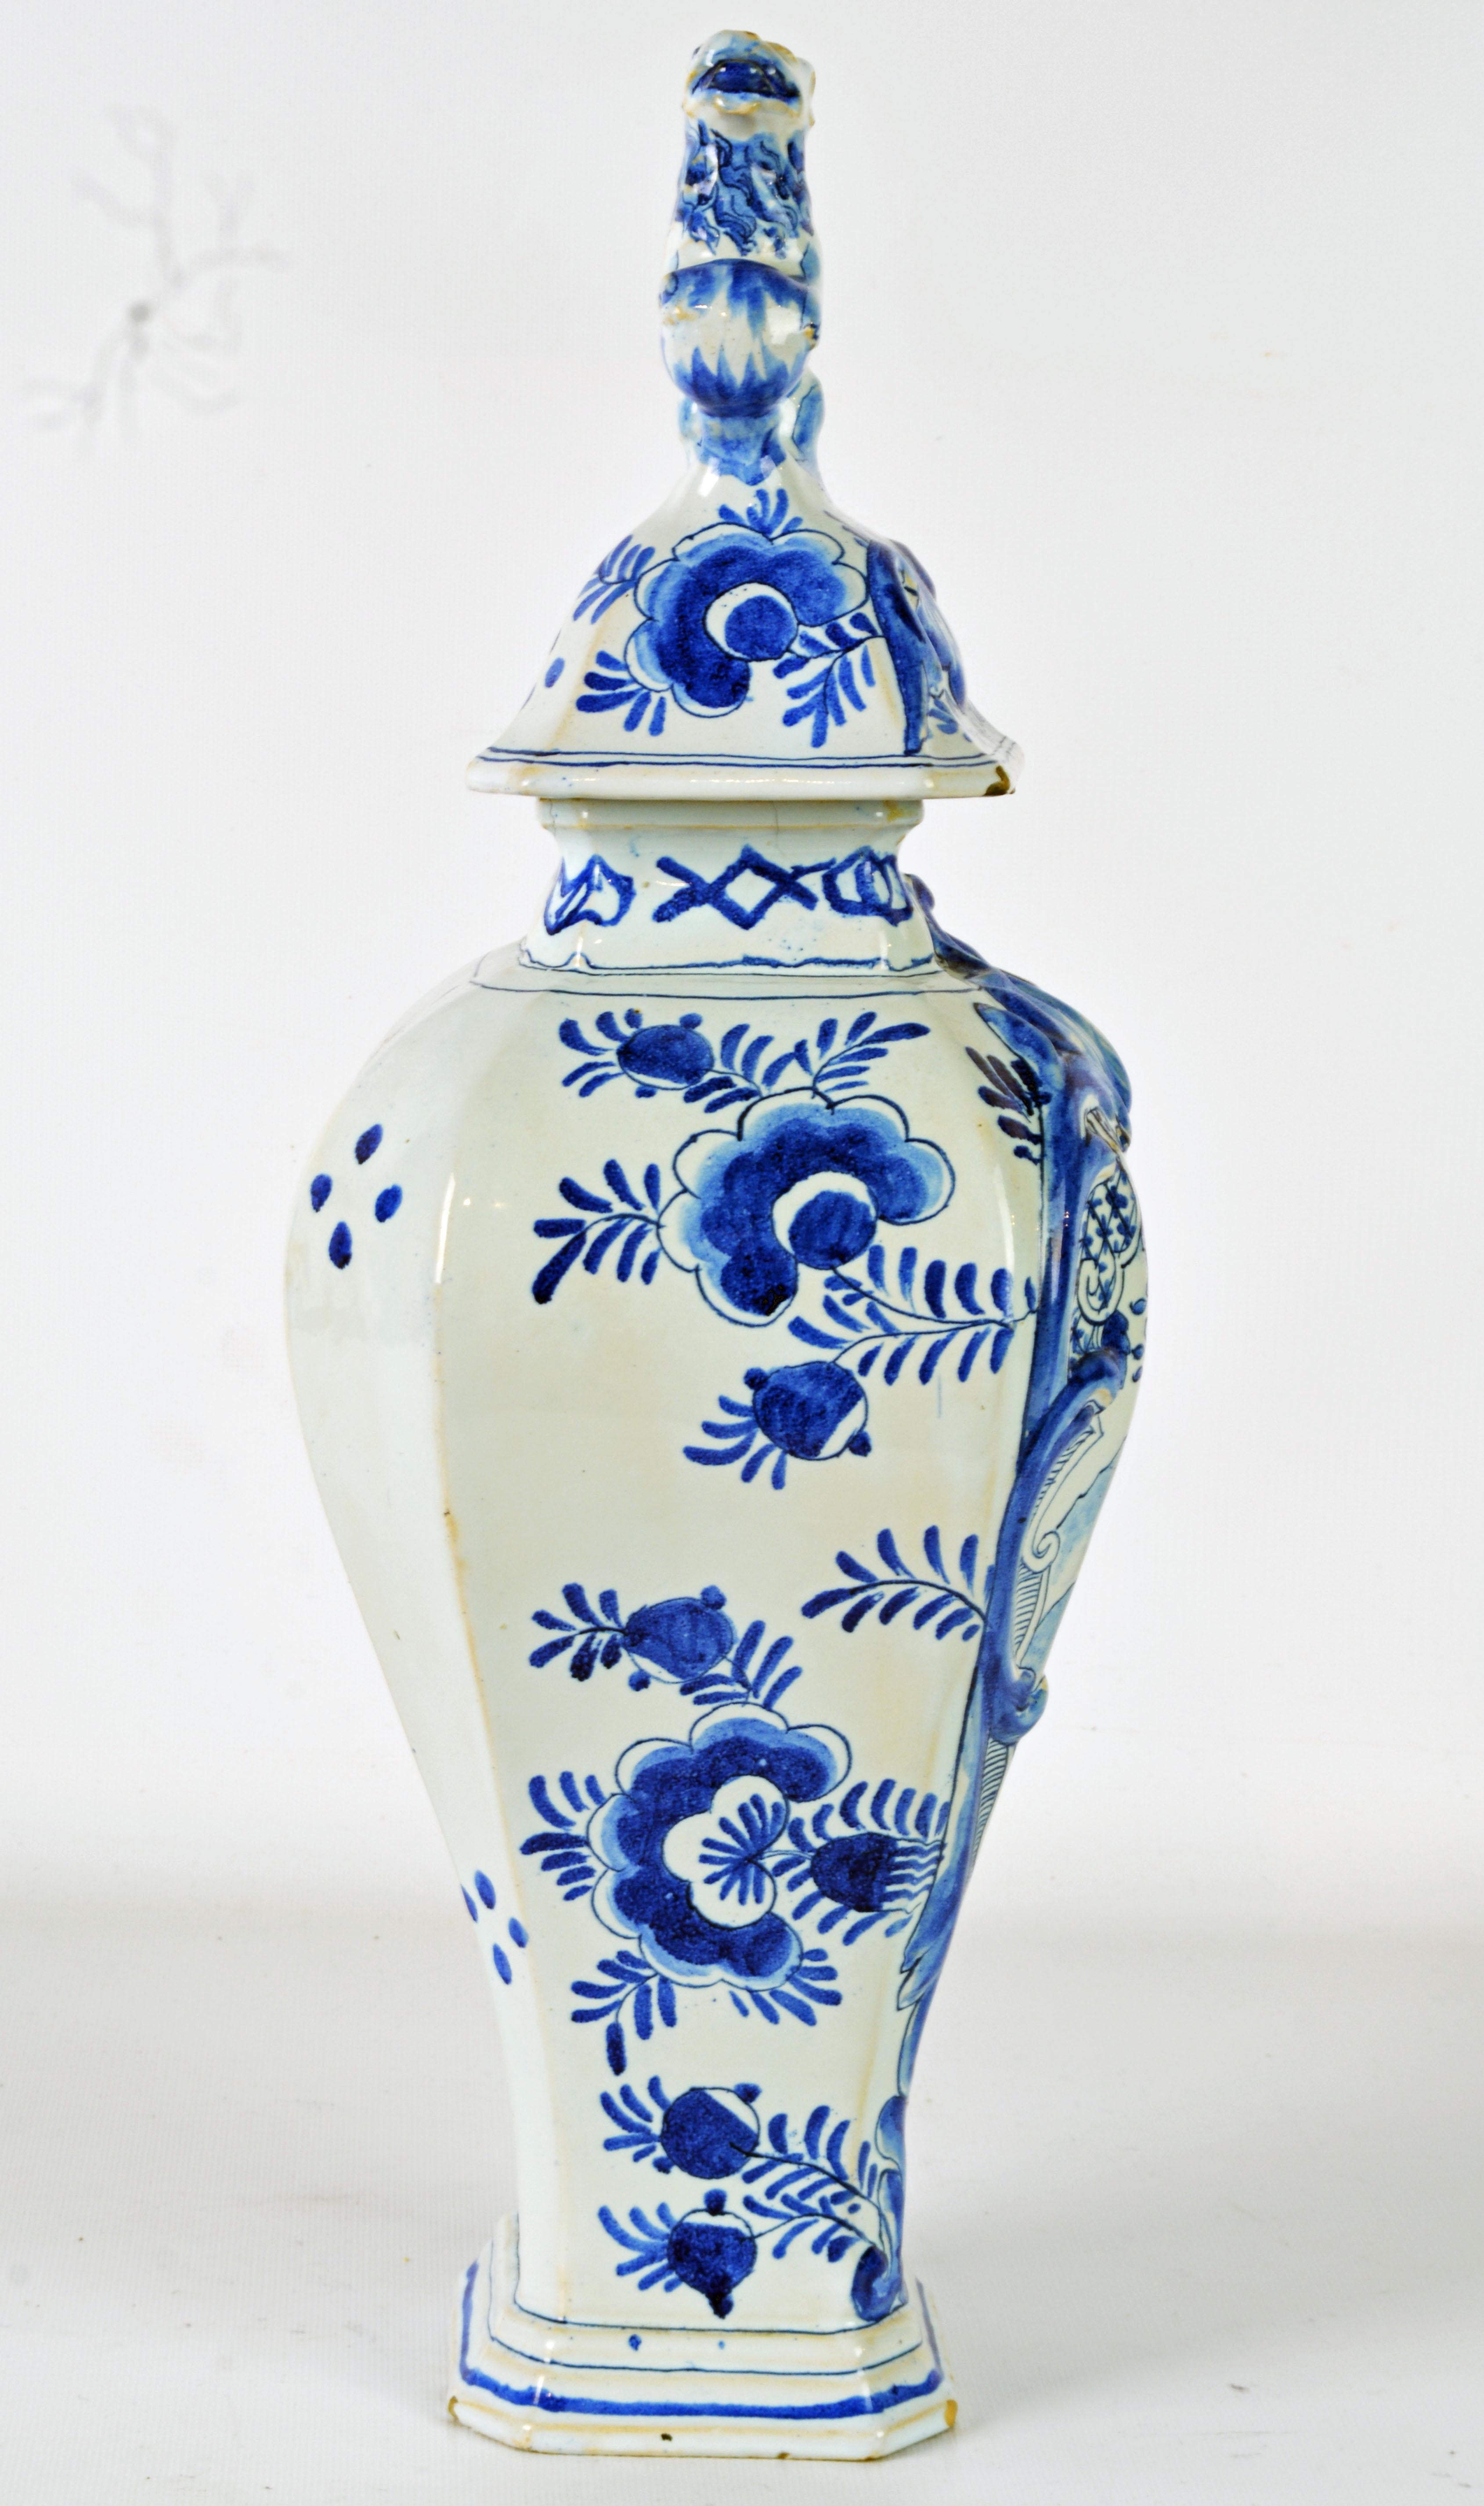 Dutch Blue and White 18th Century Delft Pottery Covered Octagonal Jar with Lion Finial